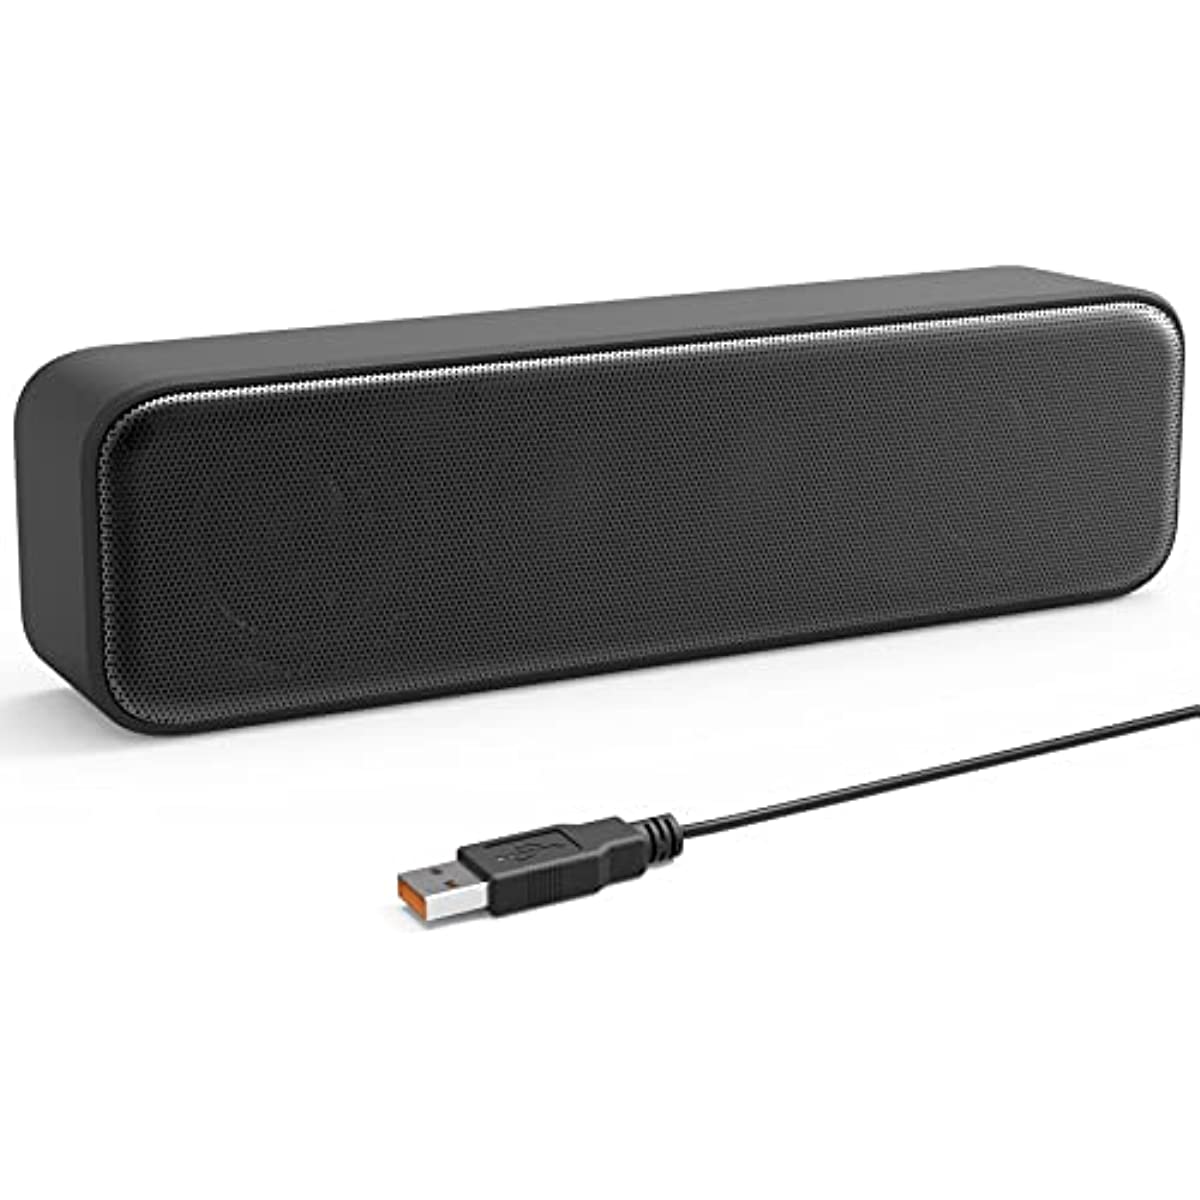 Upgrade Your Computer/Laptop Audio with this Portable Mini Sound Bar - Stereo Sound & Enhanced Bass for Windows PCs & Laptops!